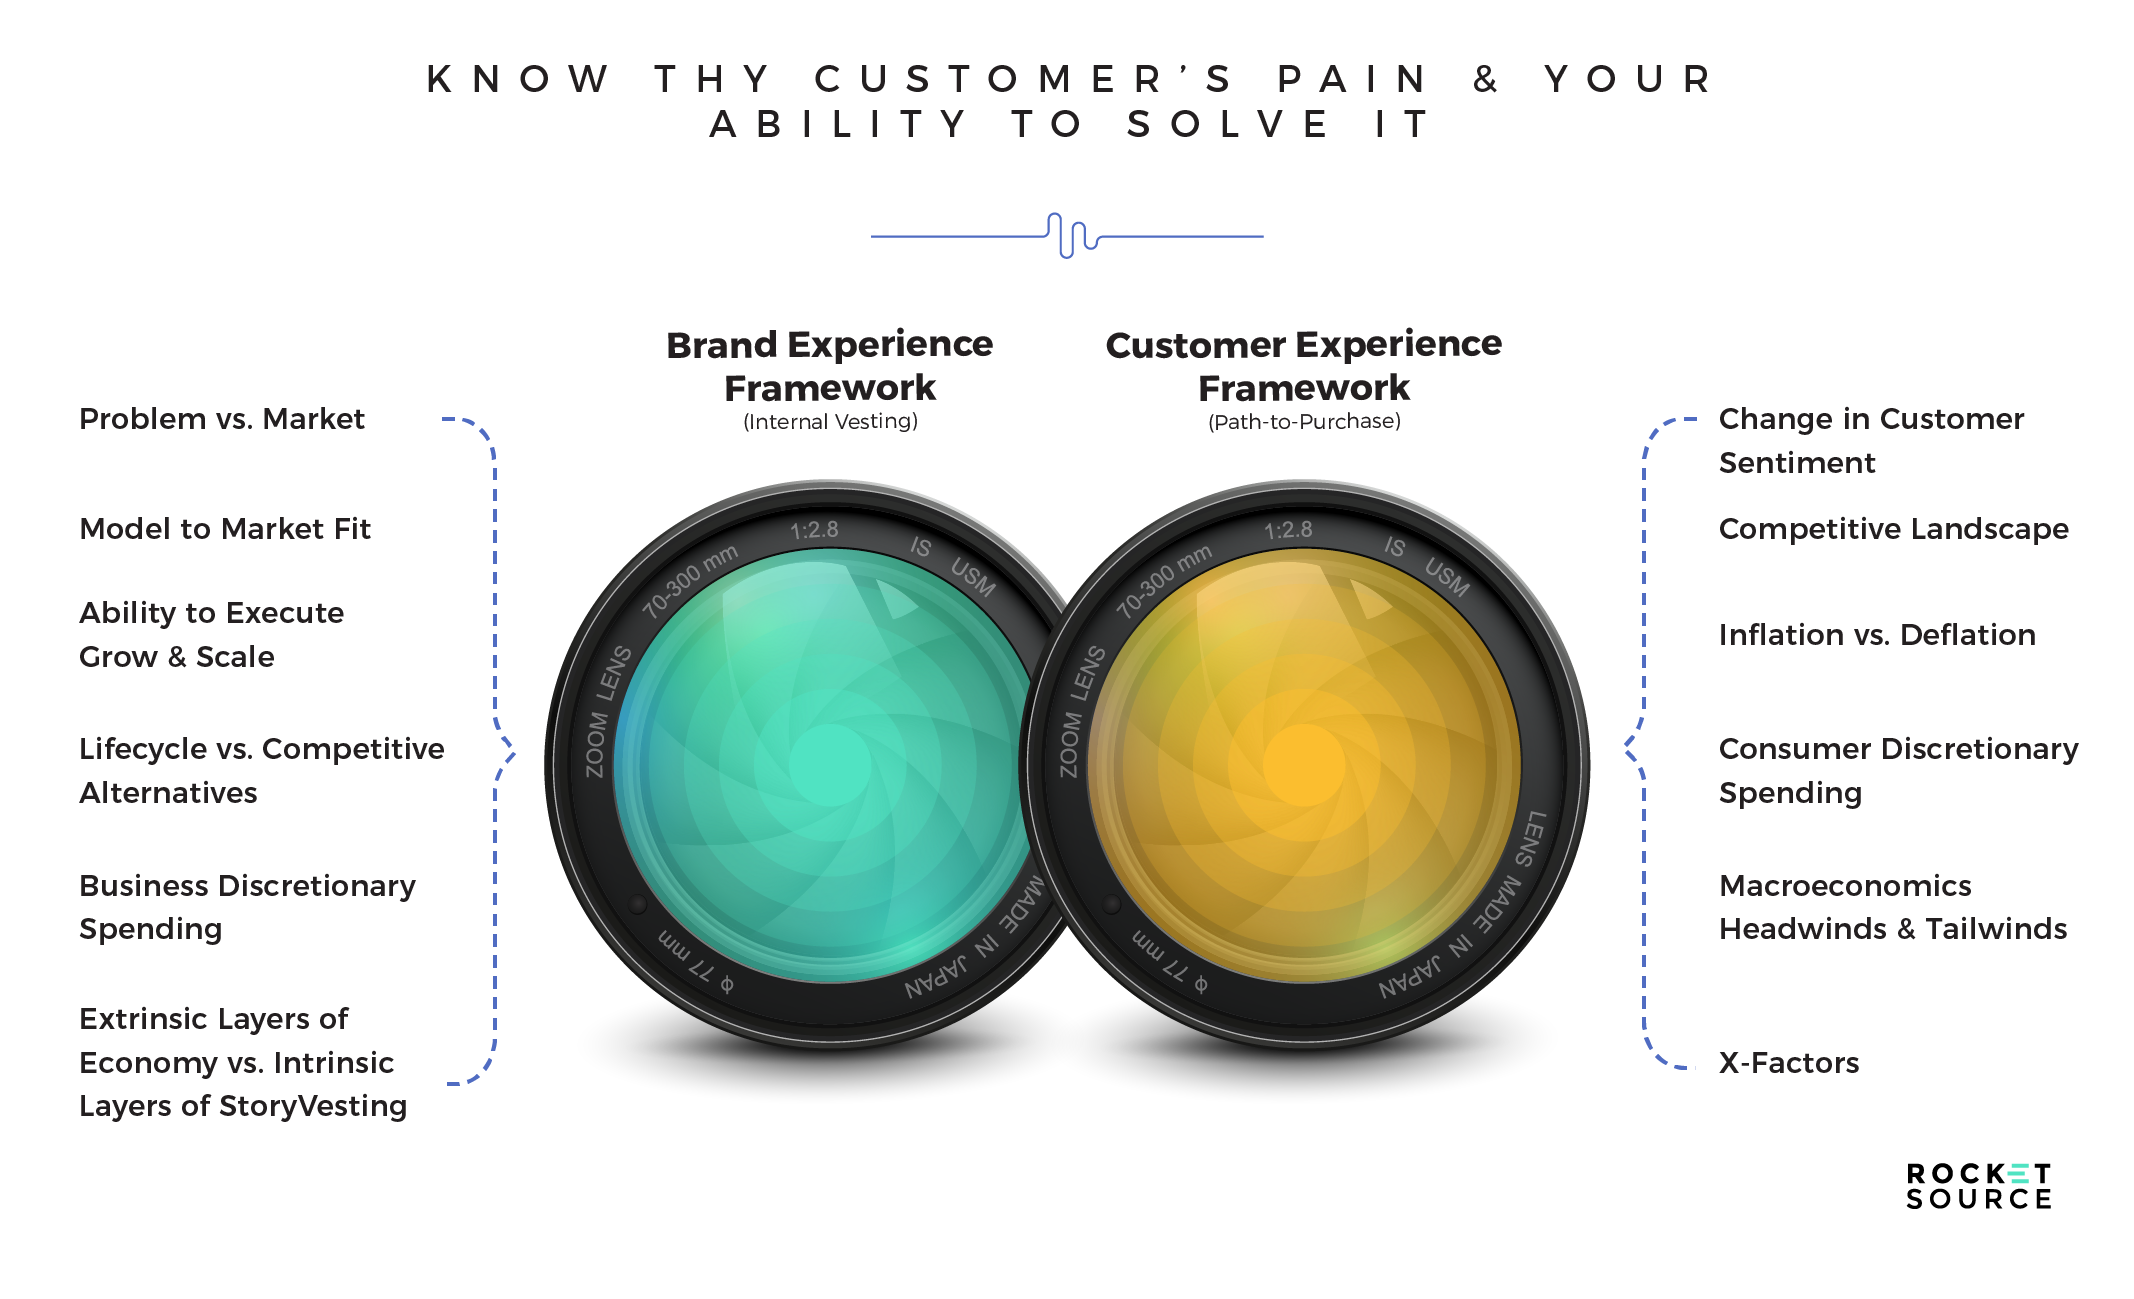 north star framework for brand and customer experience